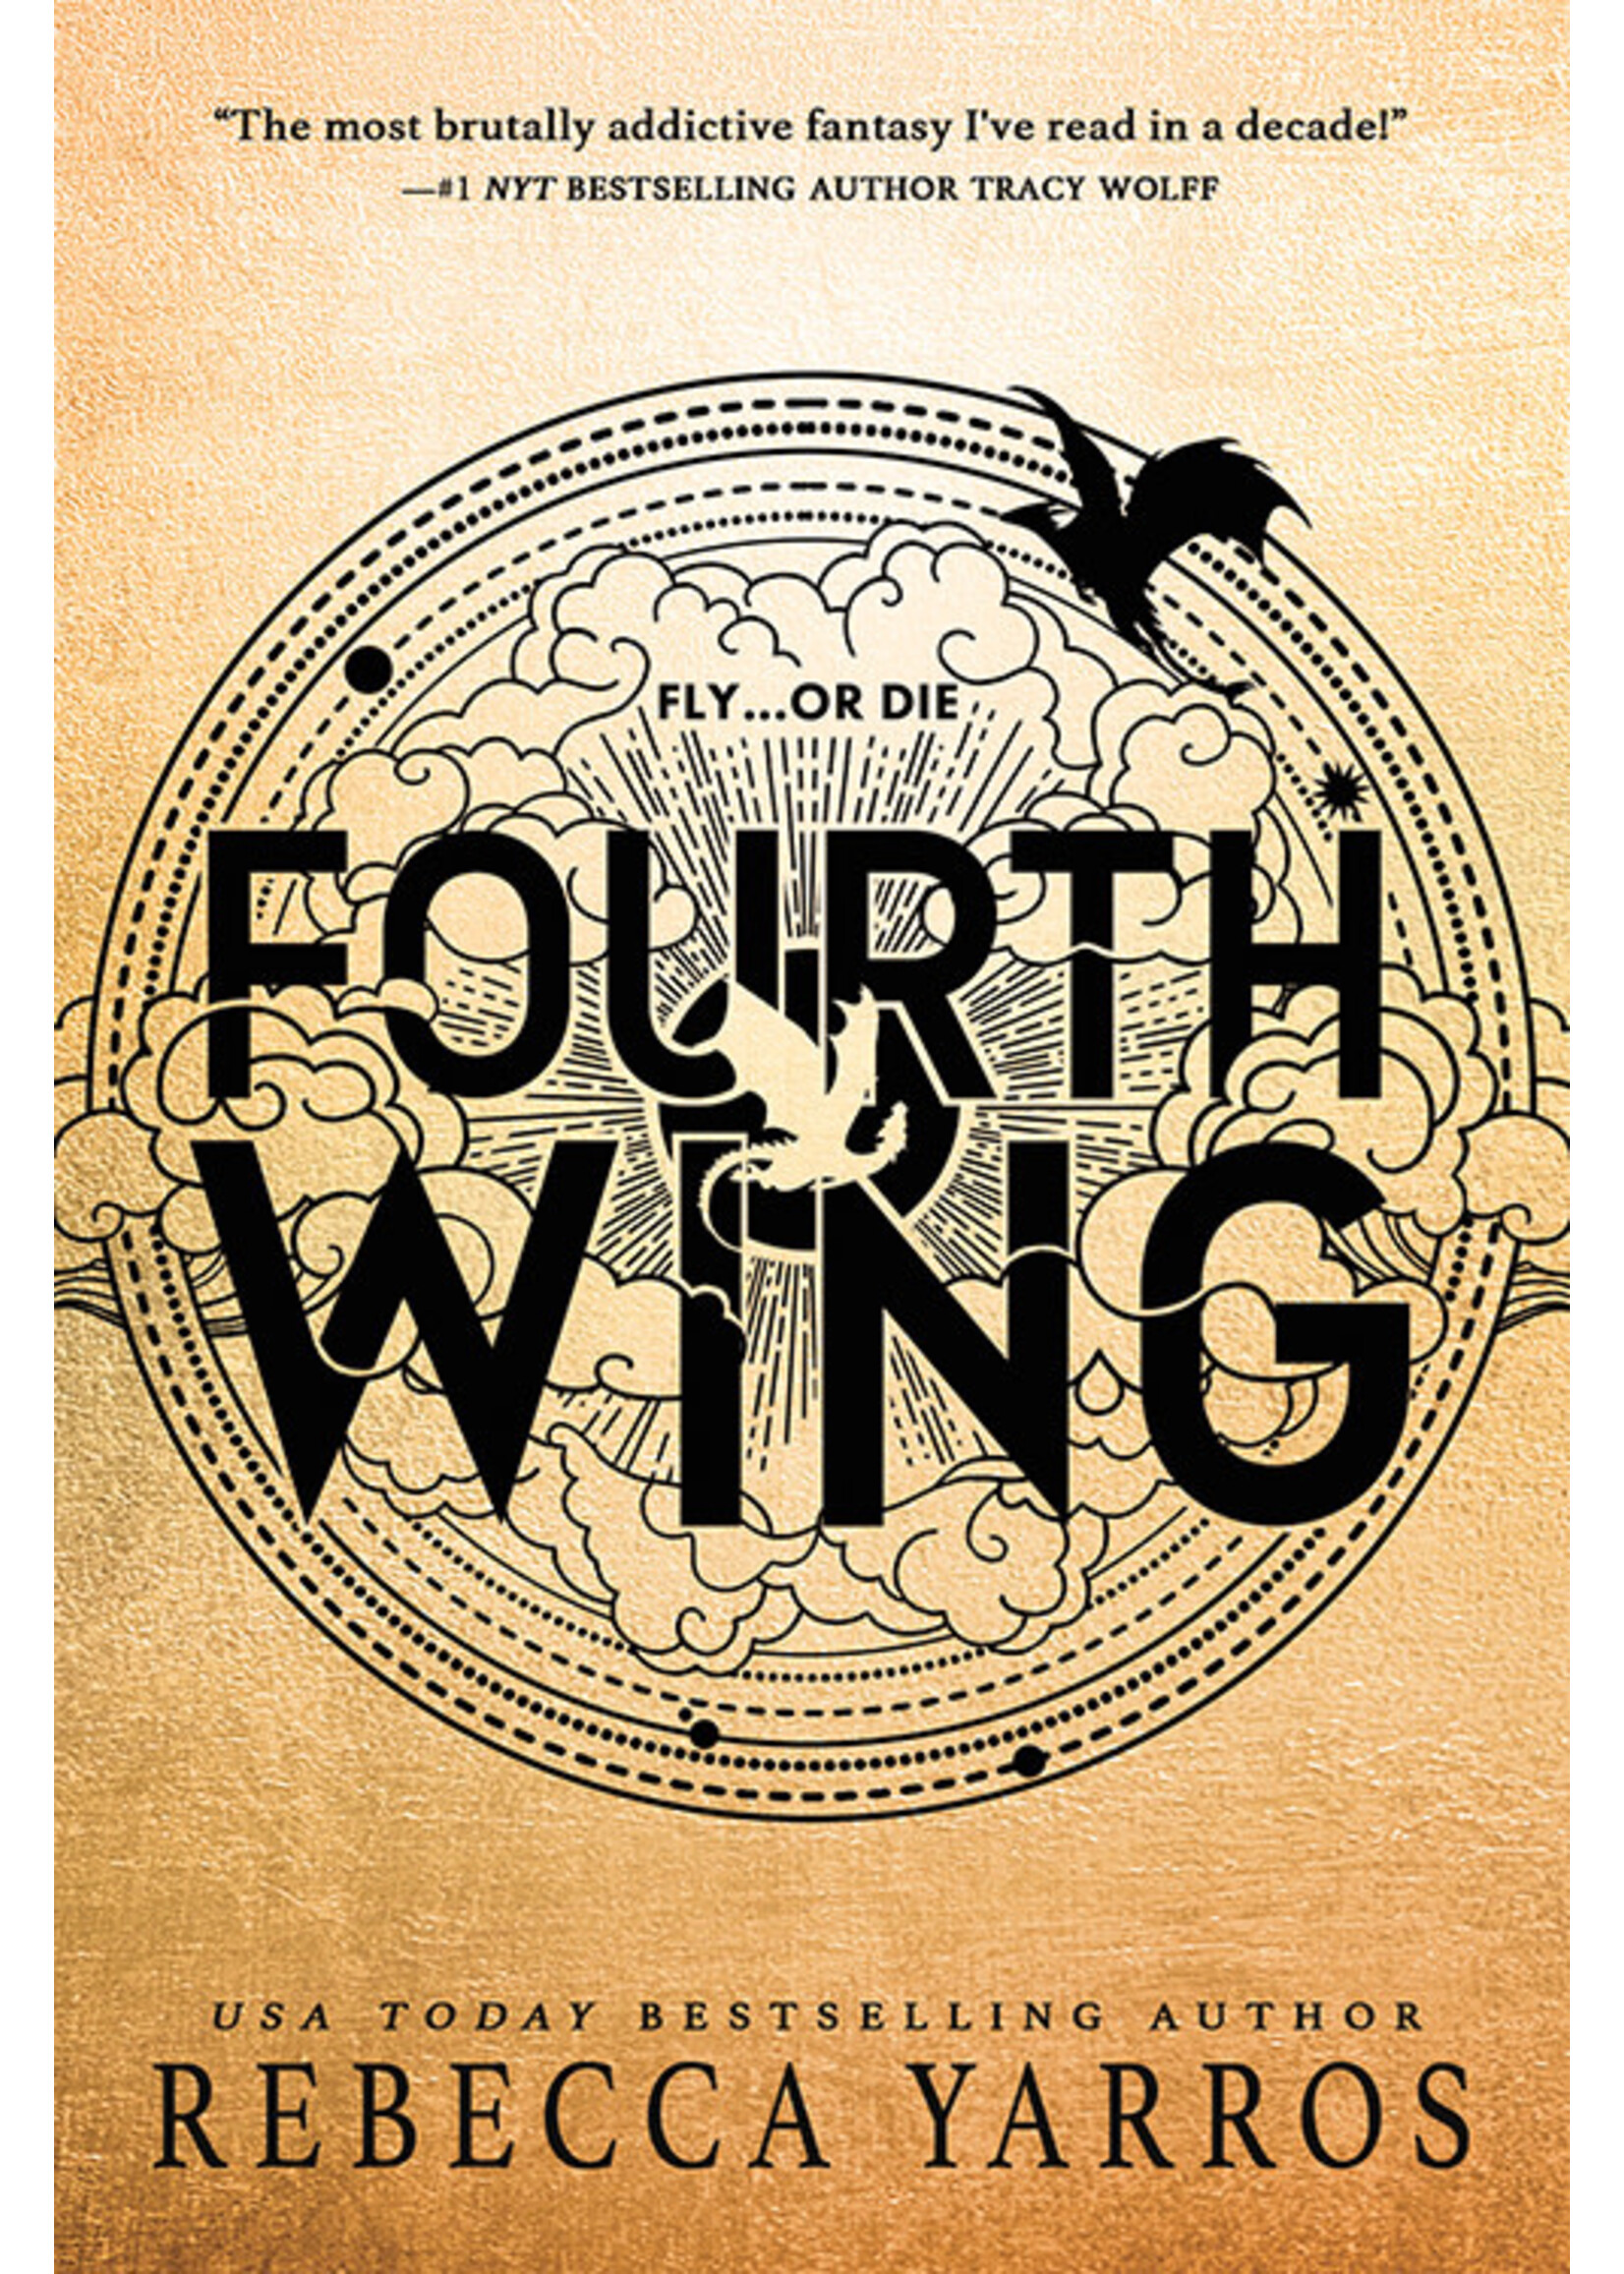 Fourth Wing (The Empyrean #1) by Rebecca Yarros